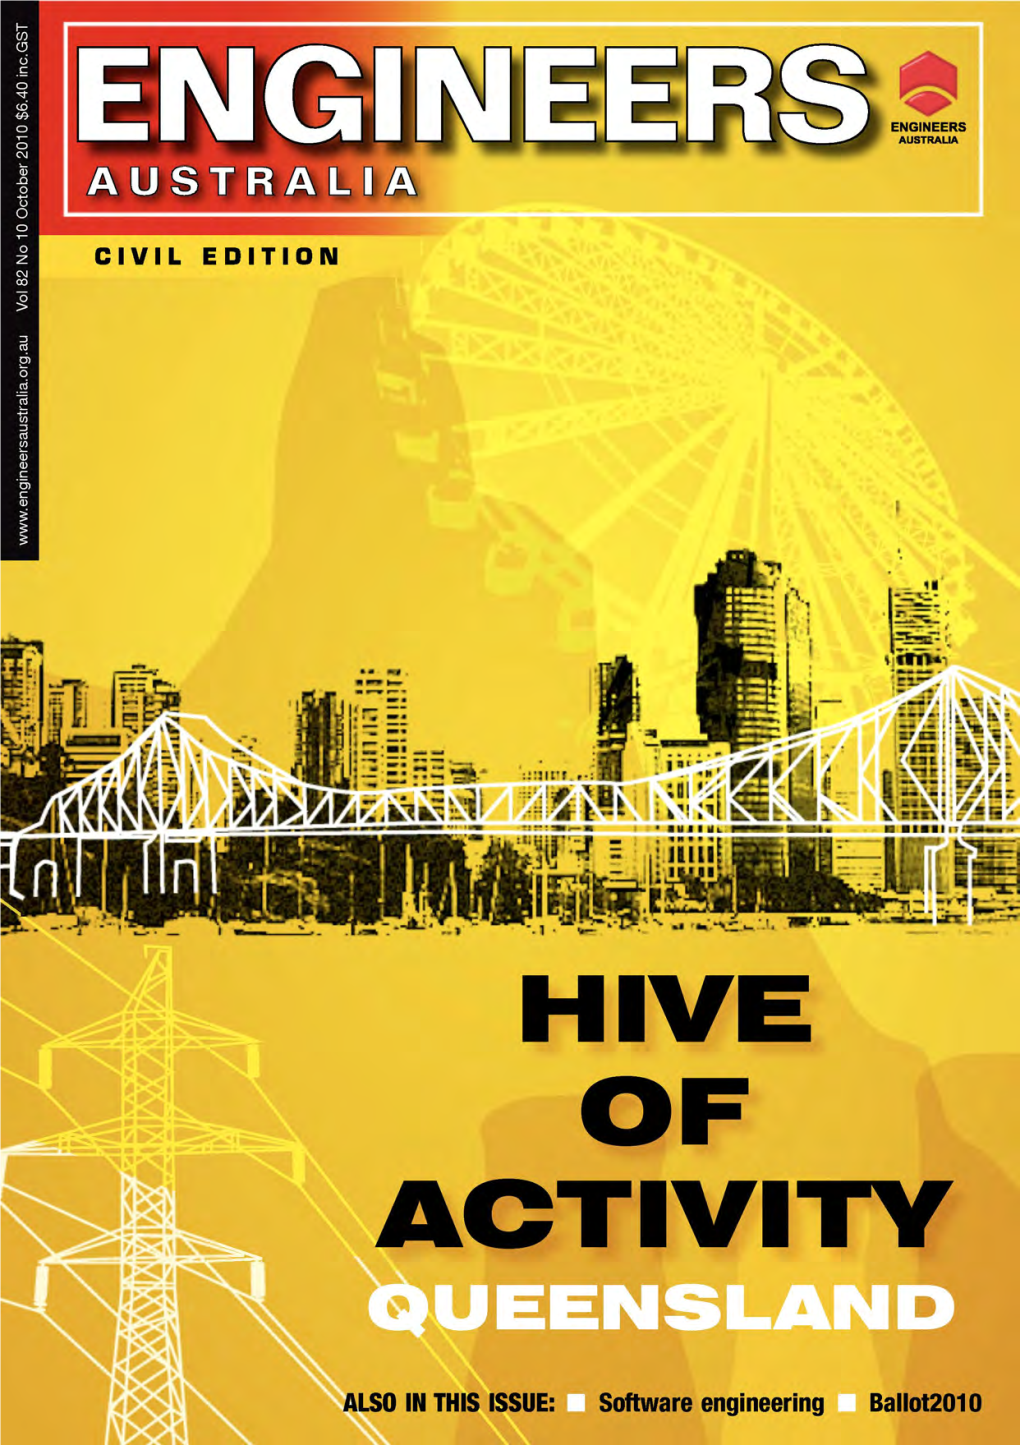 U \ Al a of ACTIVITY QUEENSLAND ALSO in THIS ISSUE: | Software